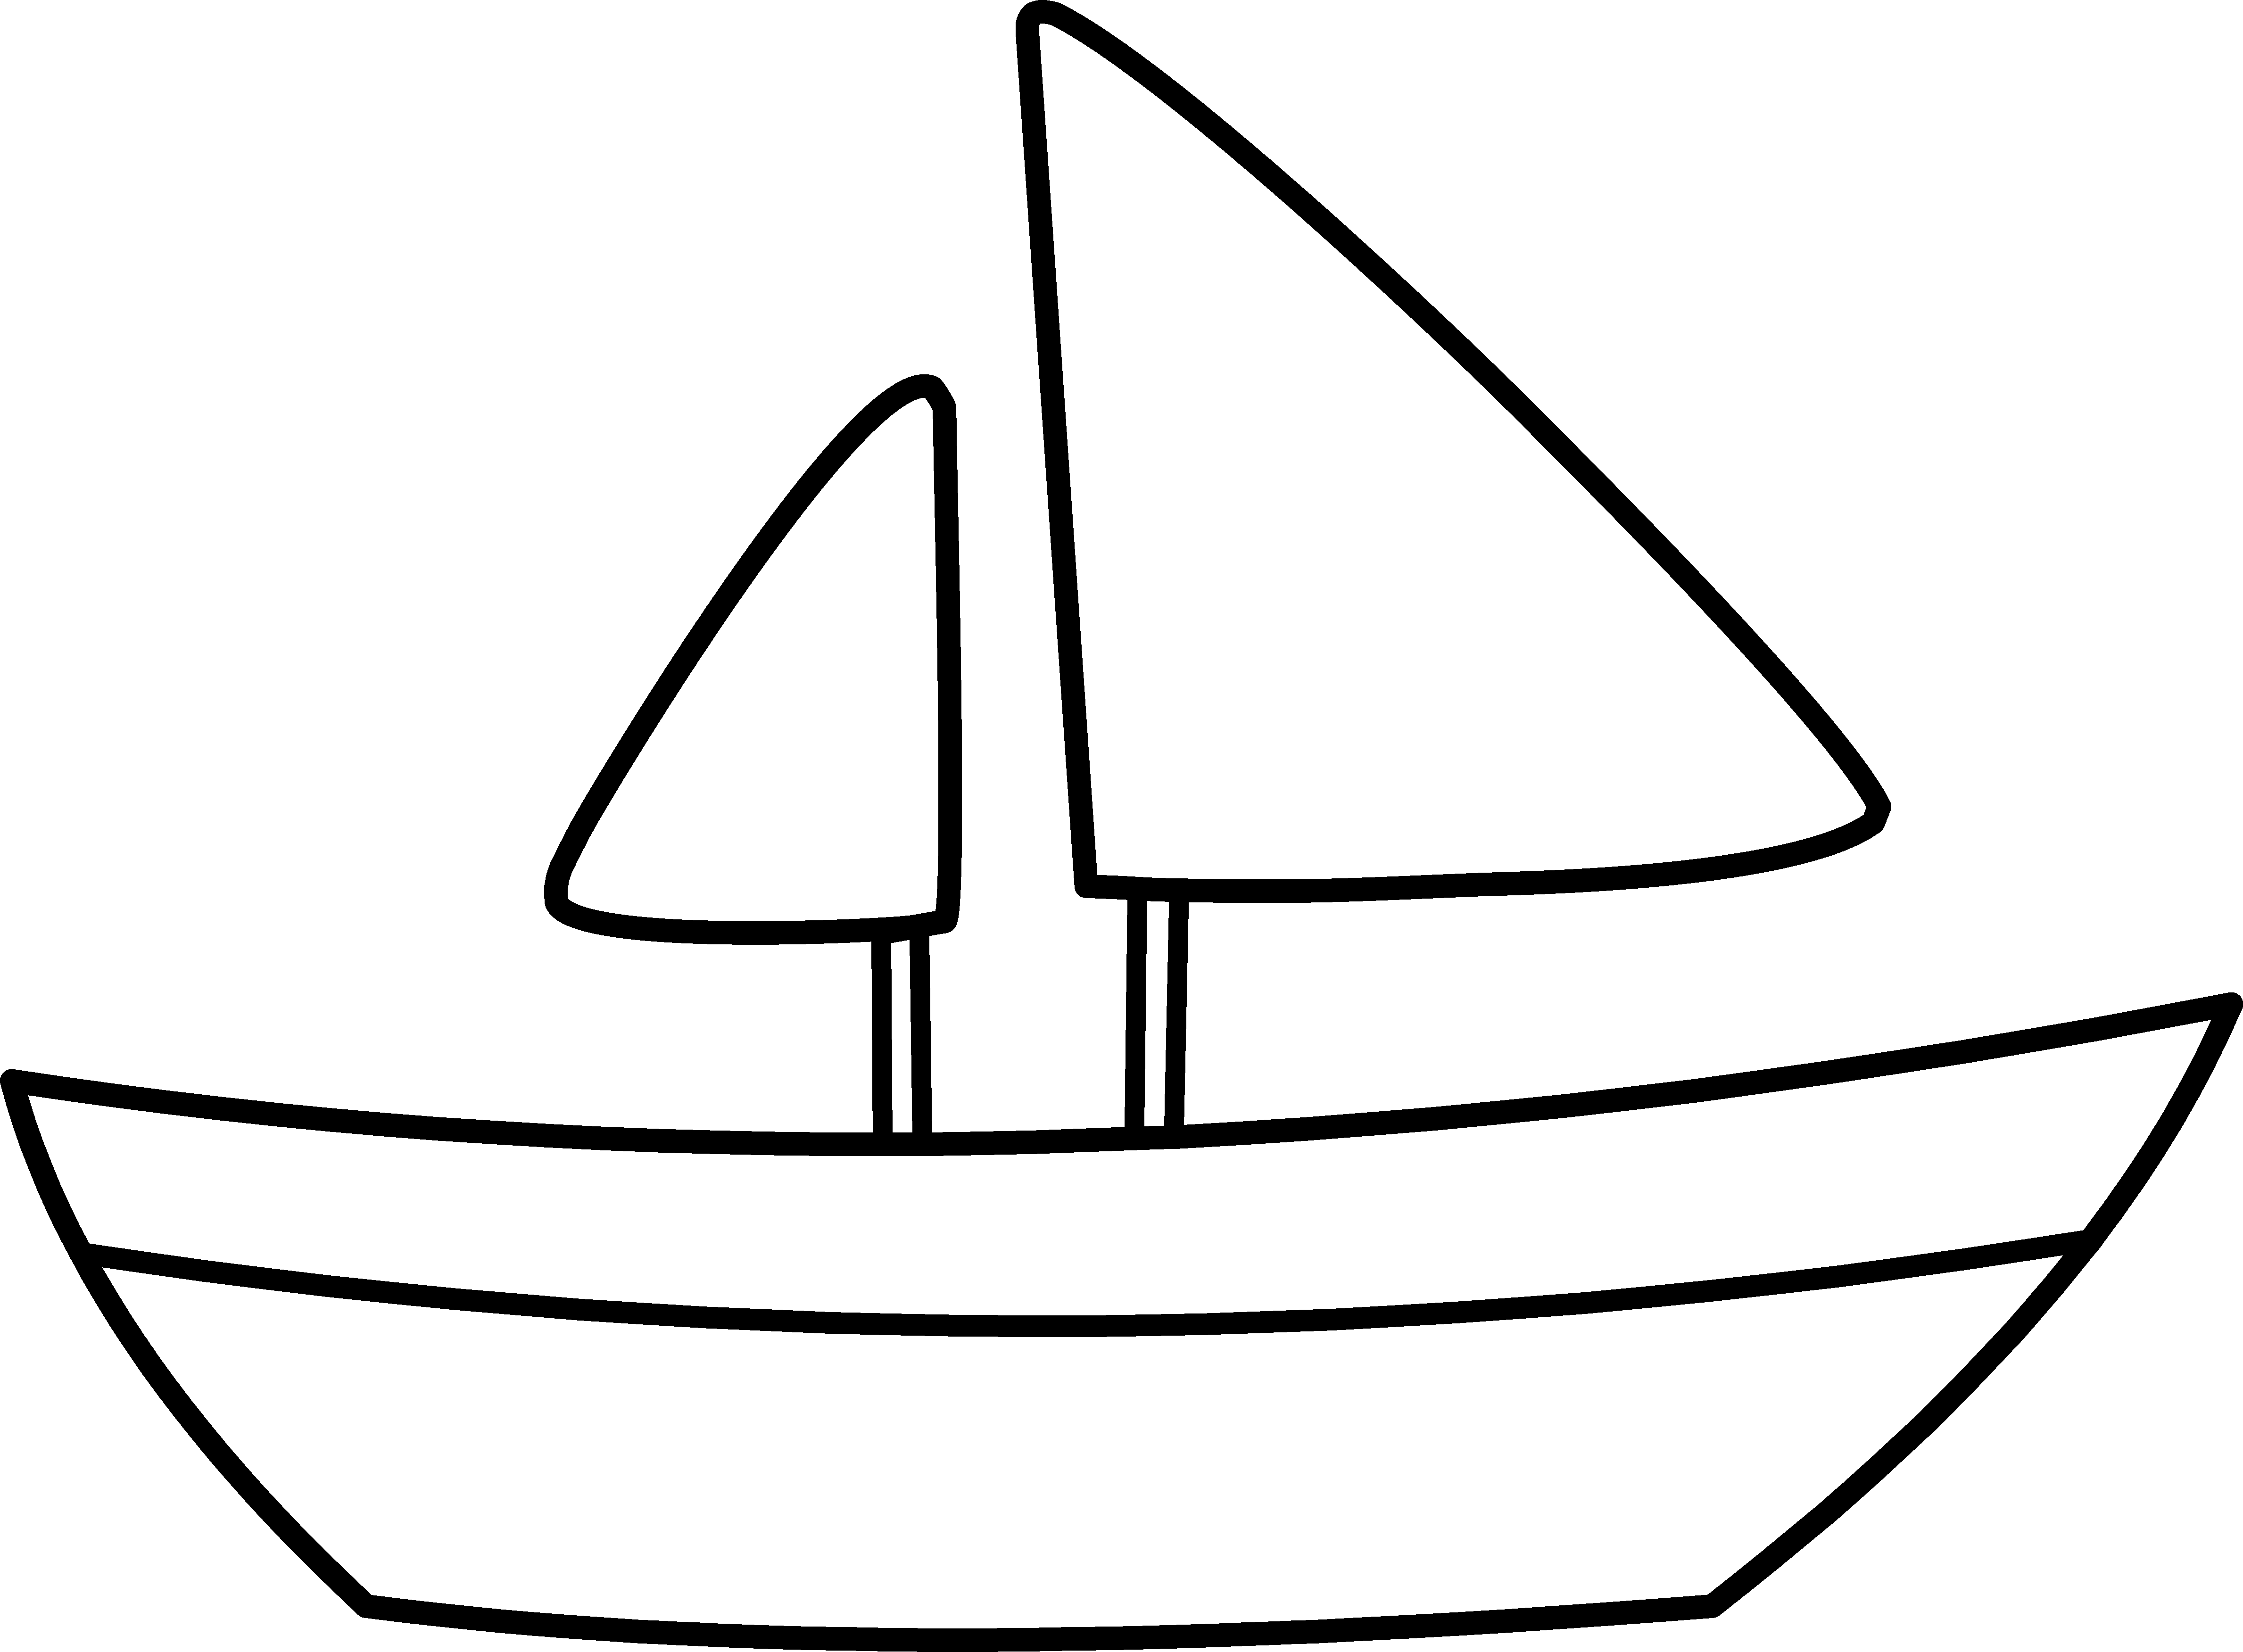 Sailboat  black and white boat sail sideways clip art cliparts and others inspiration